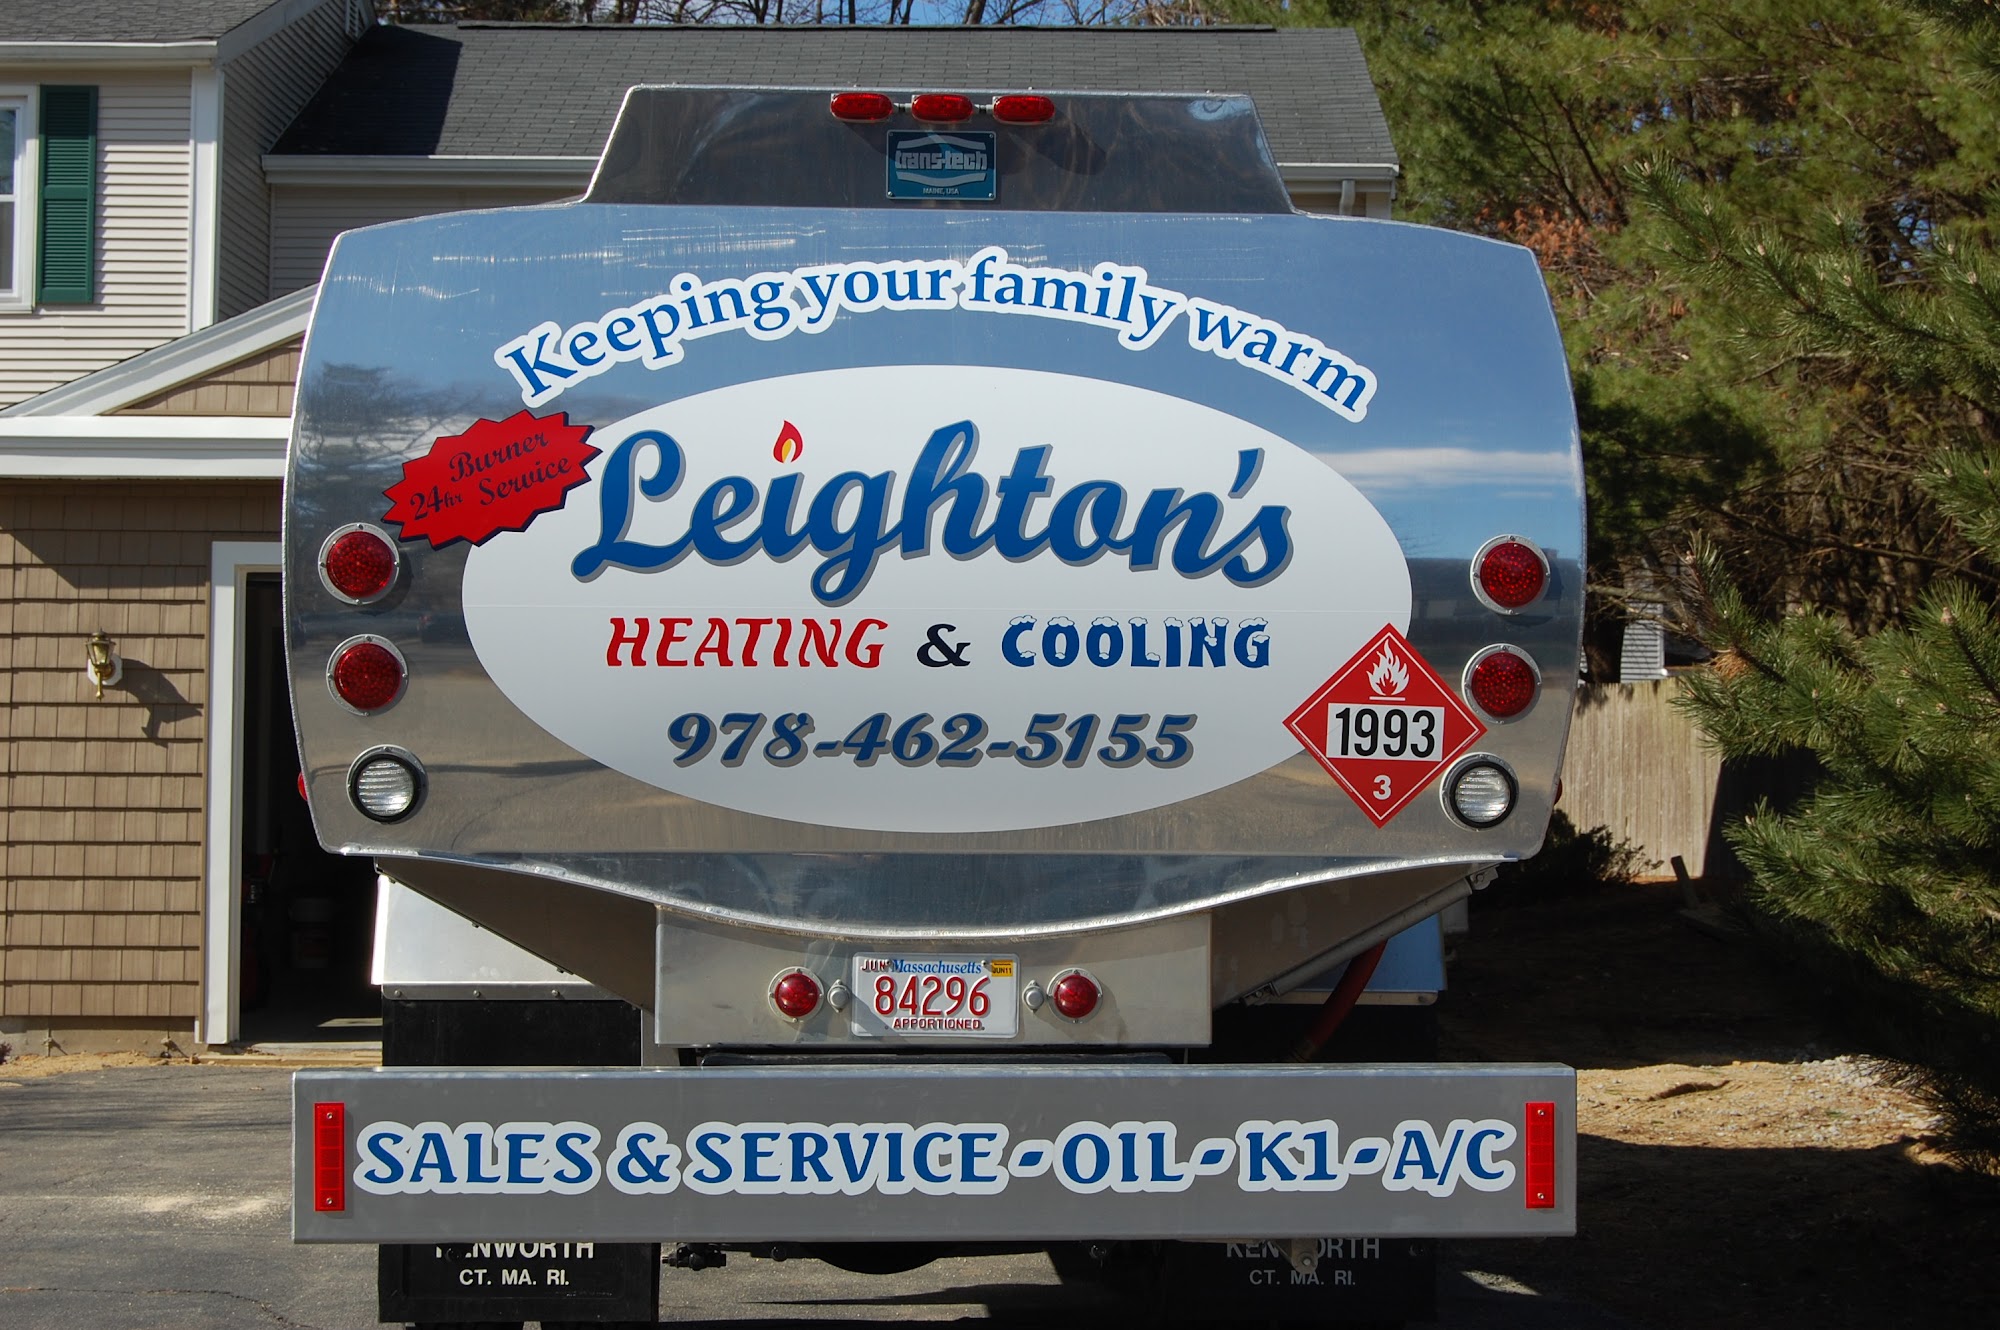 Leightons Heating & Cooling